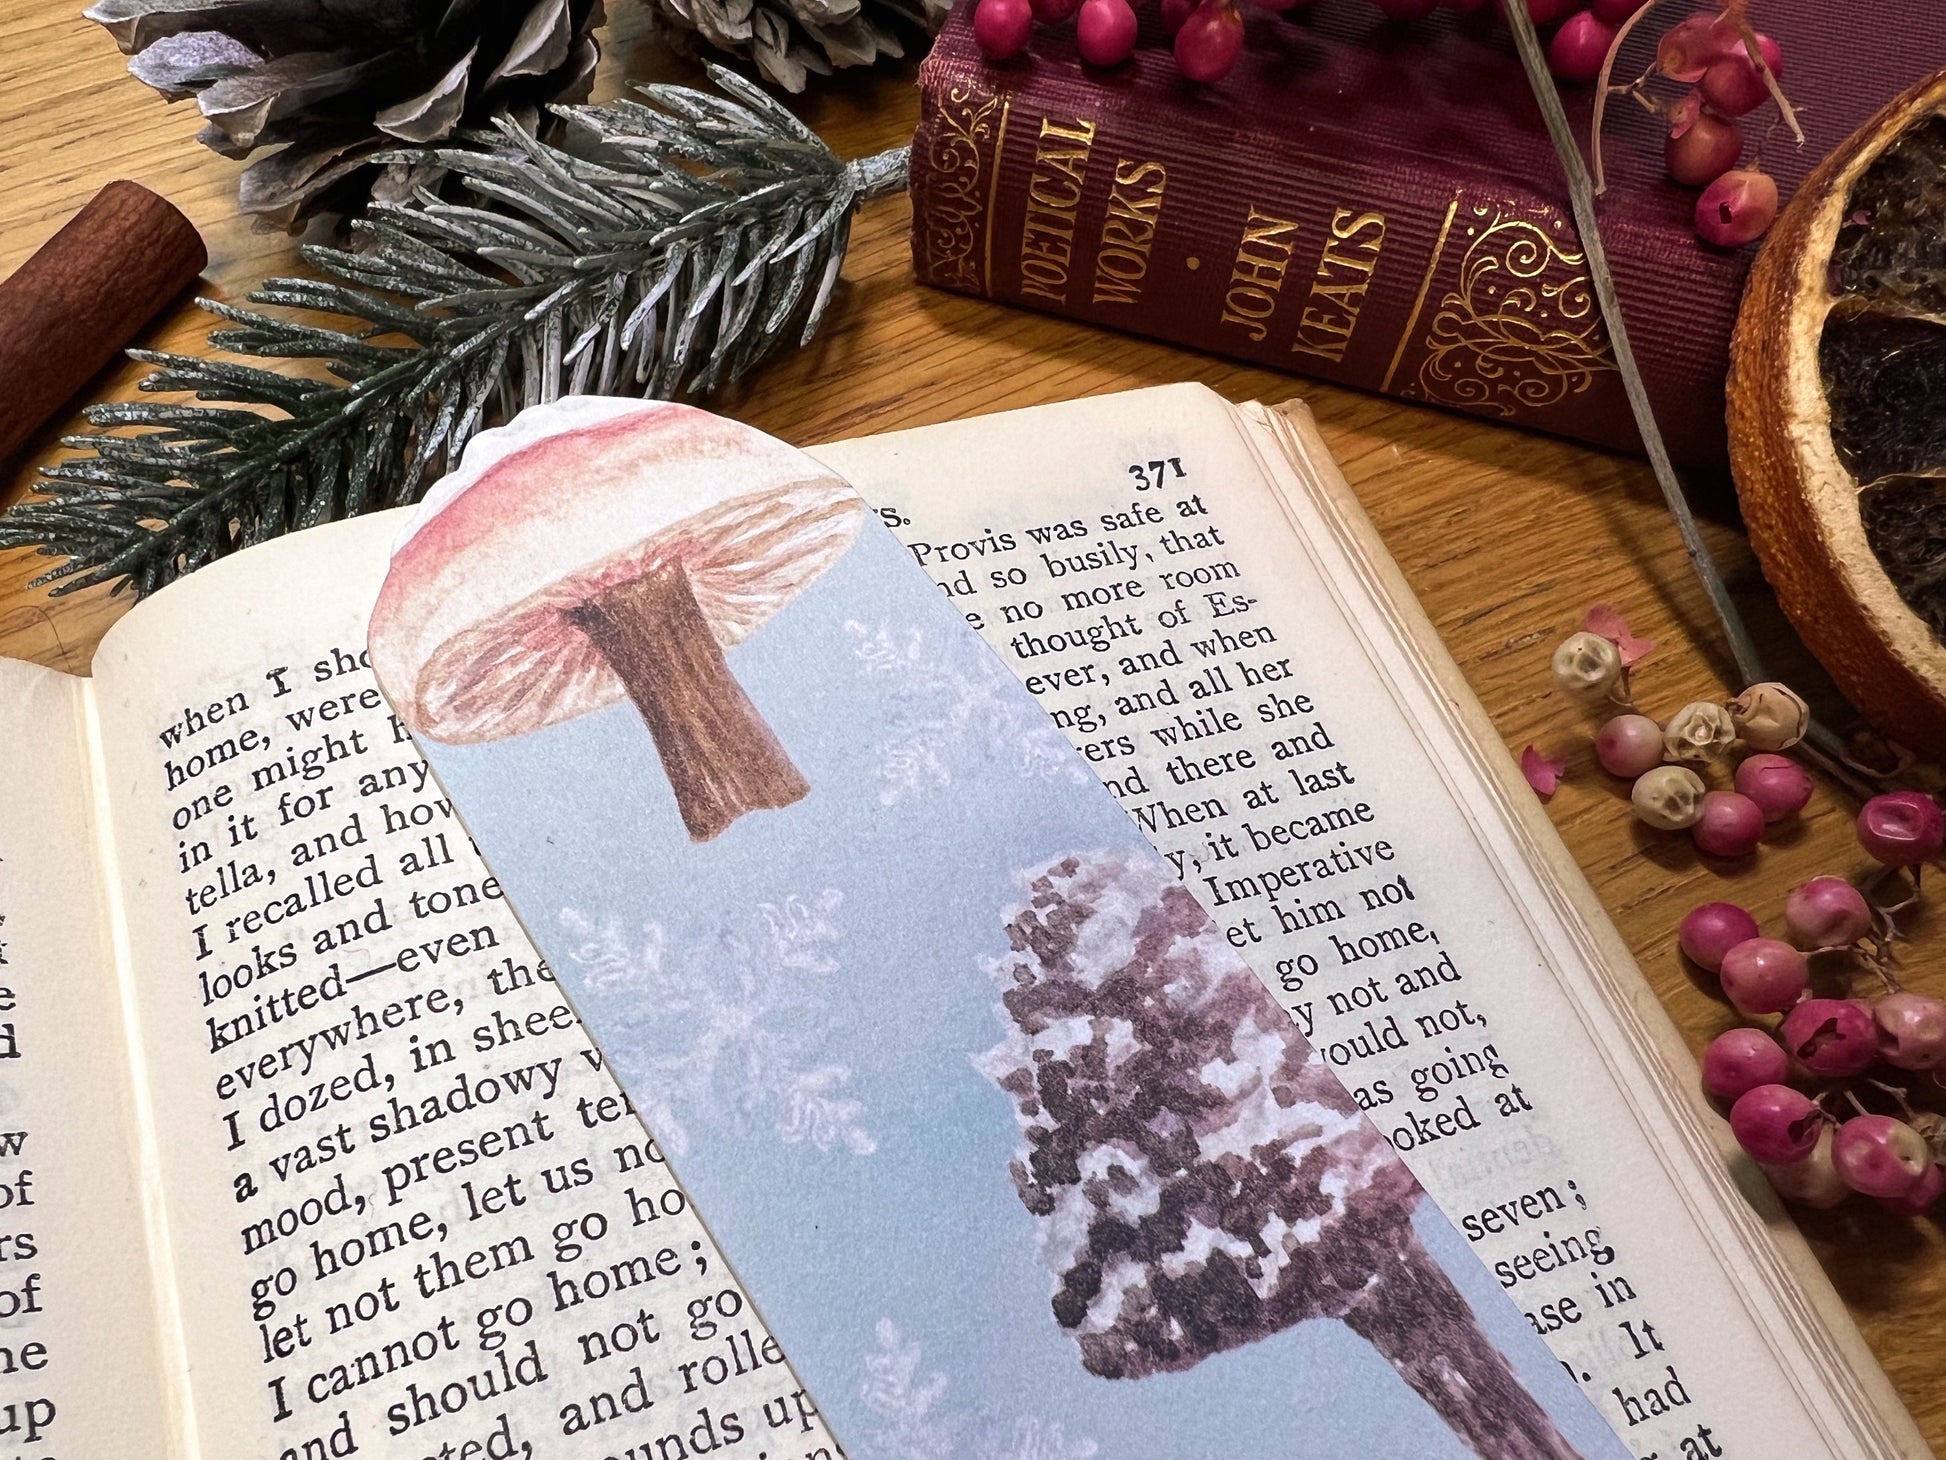 Winter wanderland snow topped mushroom illustrated bookmark, cut at the top to the shape of a snow topped milkcap mushroom